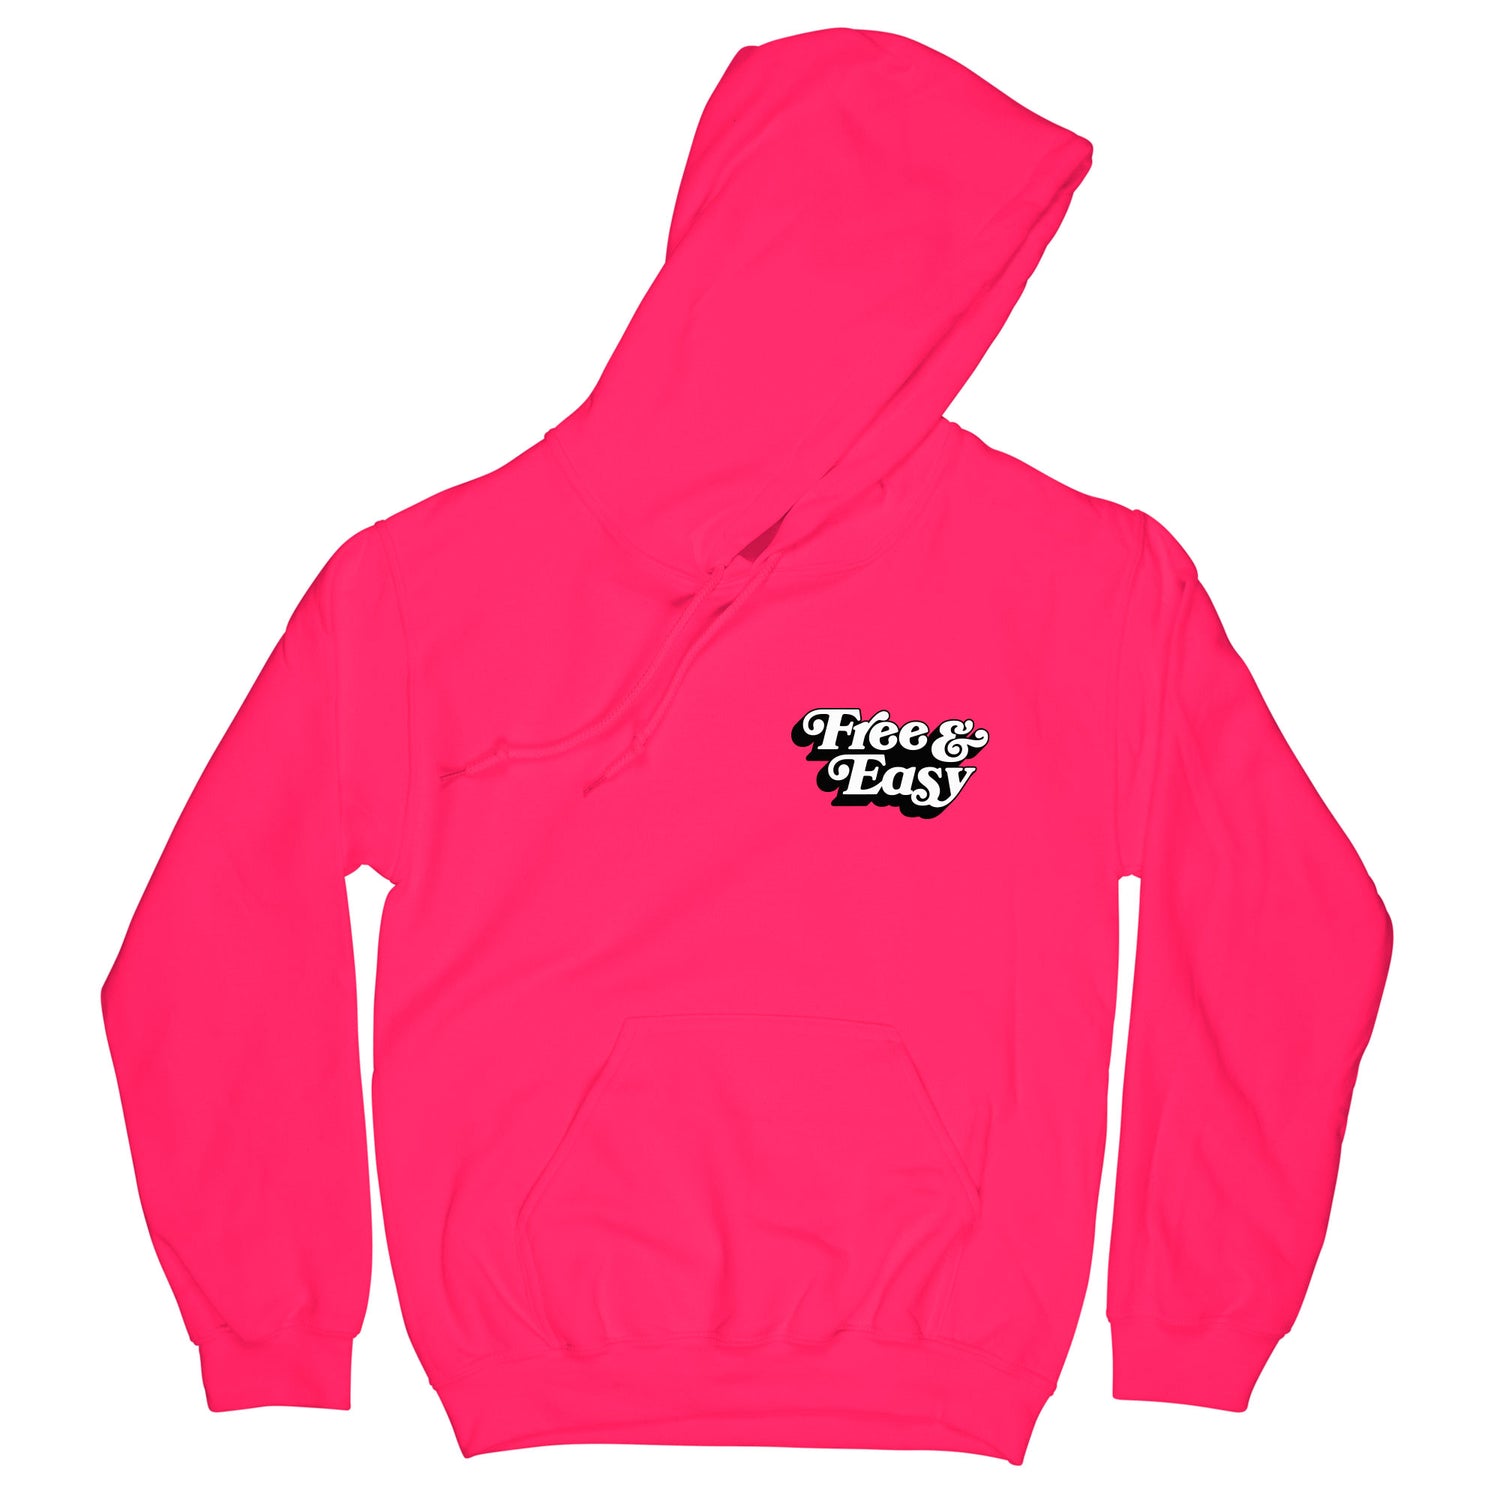 Don't Trip OG Hoodie in neon pink with white and black Free & Easy logo design on front left side on a white background - Free & Easy